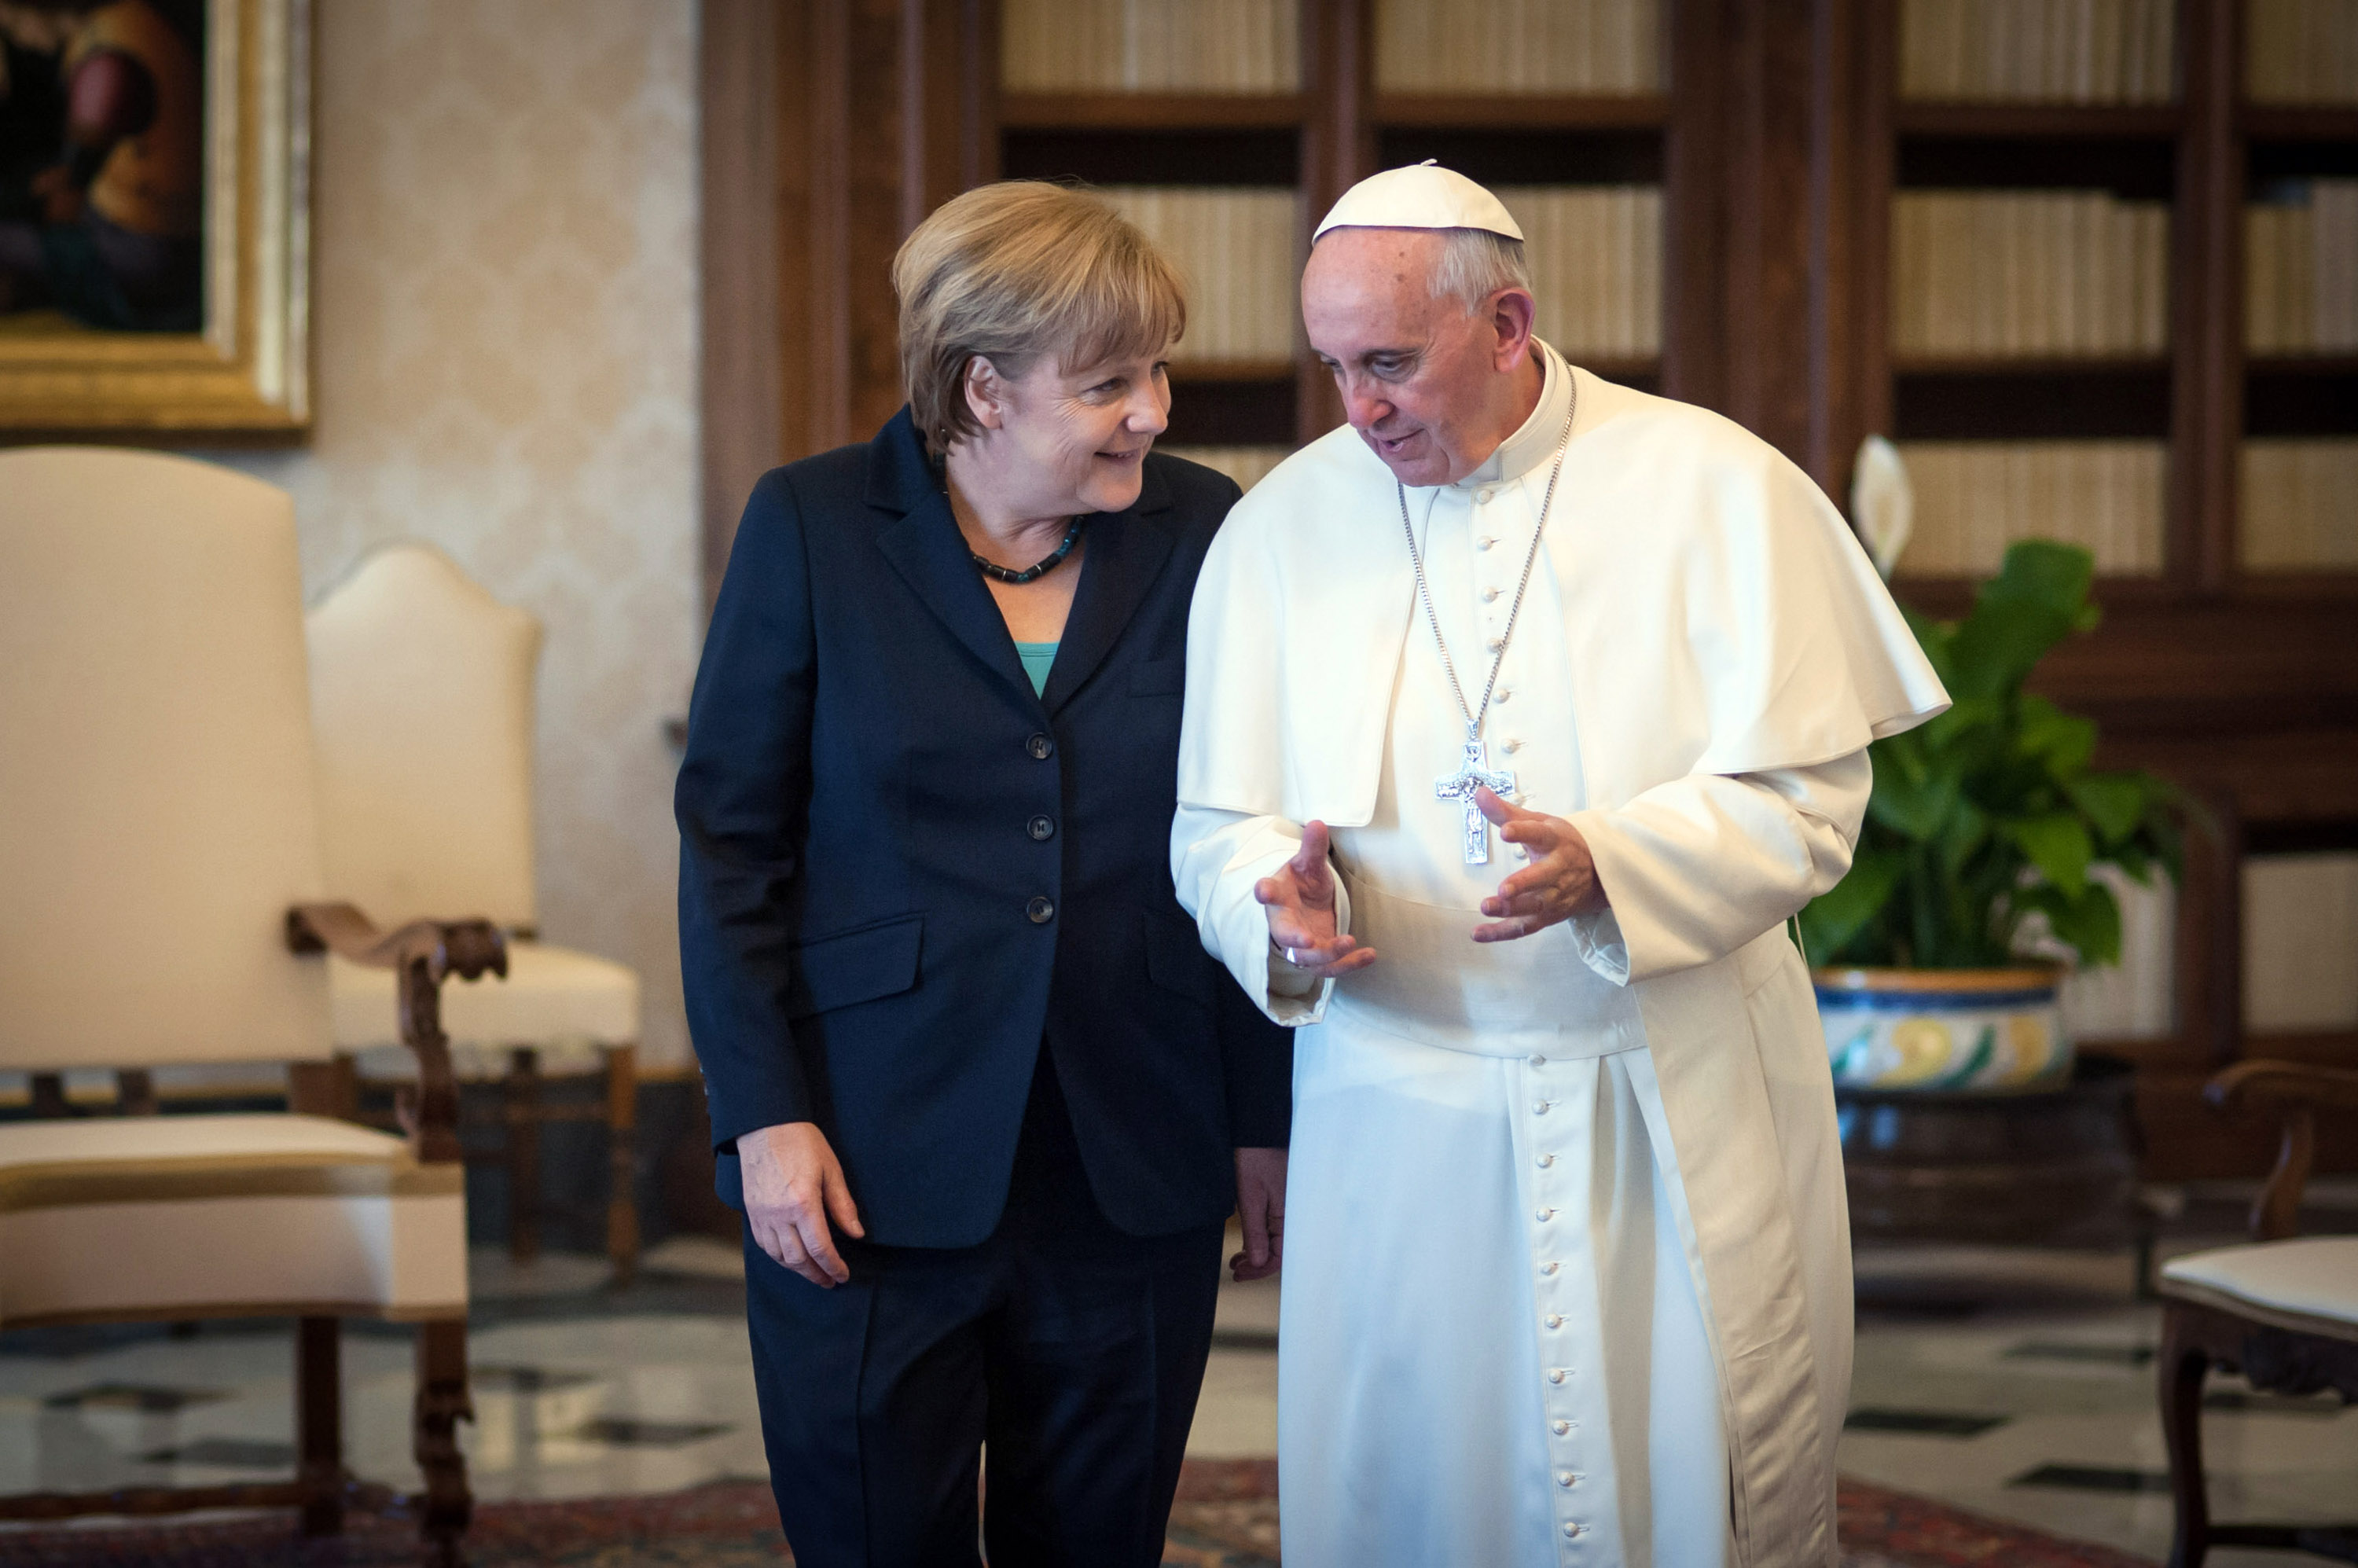 Angela Merkel chats with Pope Francis after their meeting in his private library at the Vatican, in 2013.